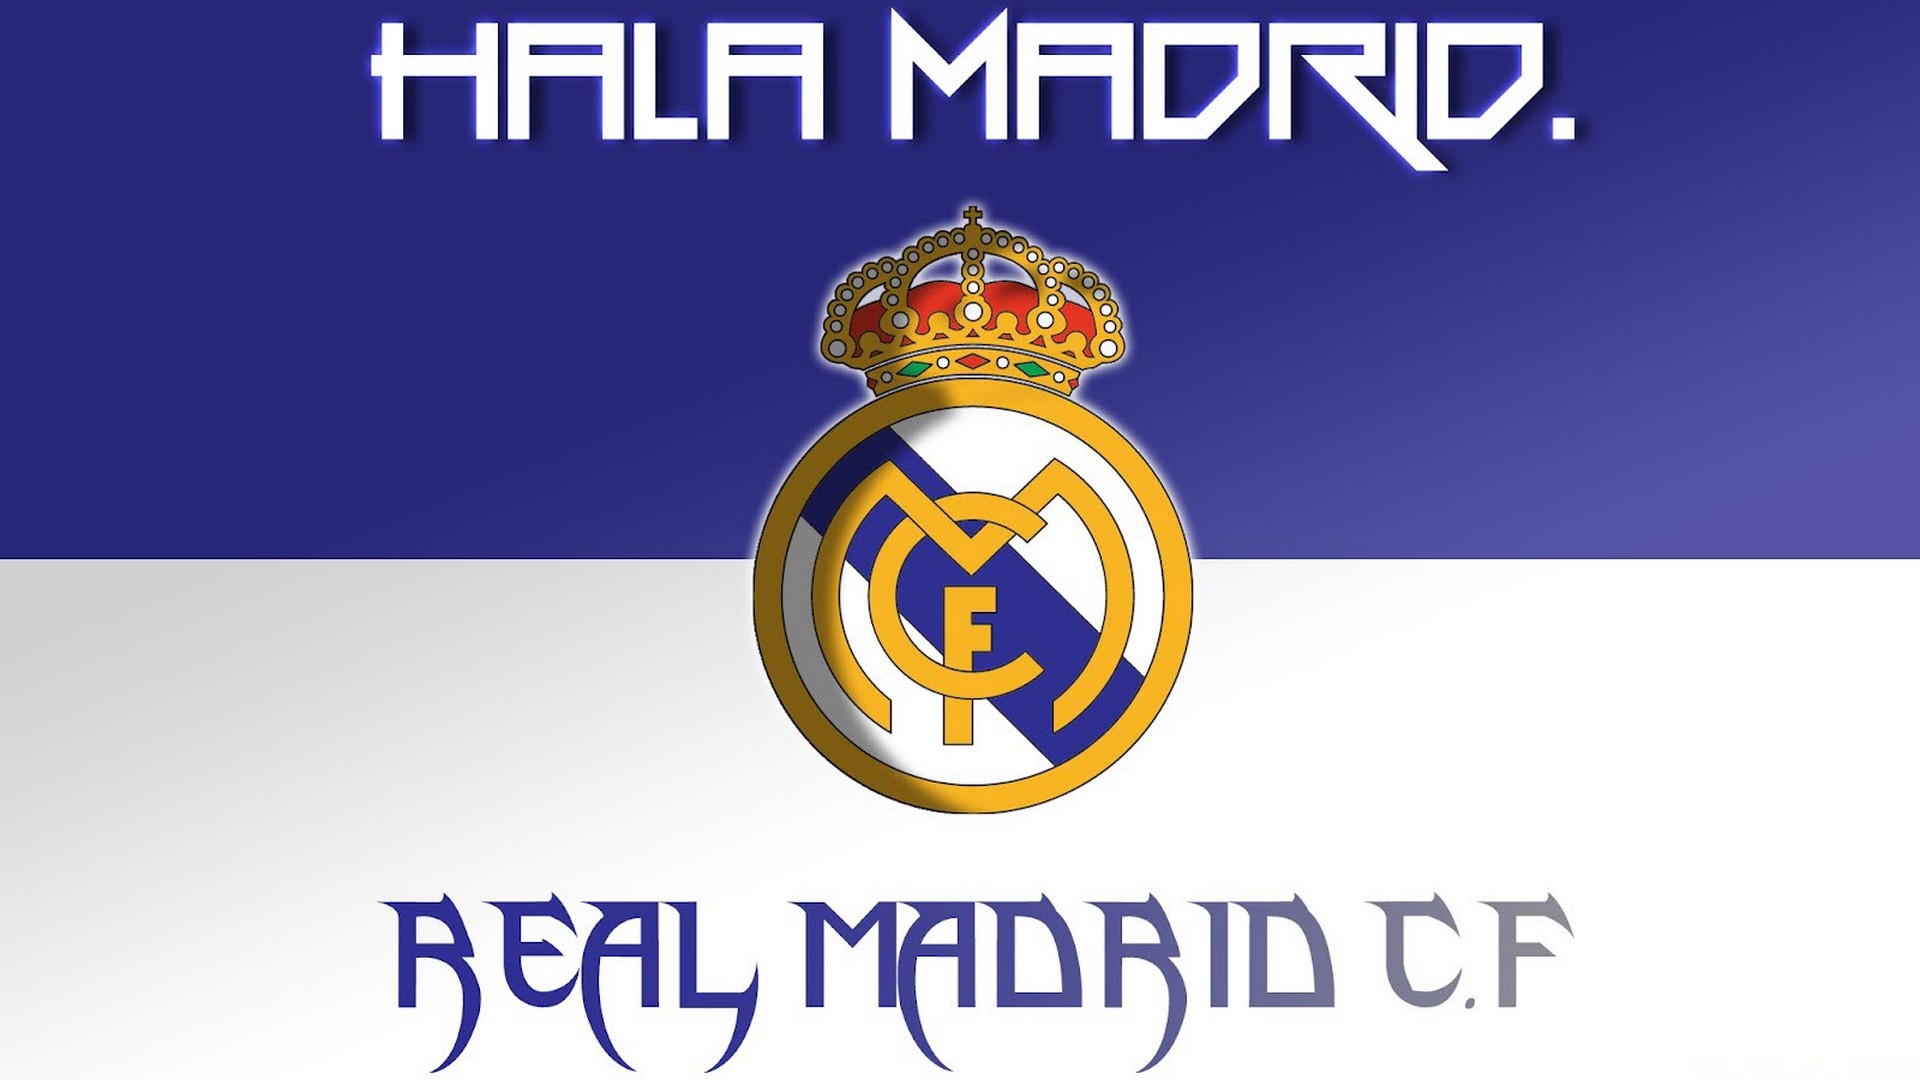 Windows Wallpaper Real Madrid with resolution 1920x1080 pixel. You can make this wallpaper for your Mac or Windows Desktop Background, iPhone, Android or Tablet and another Smartphone device